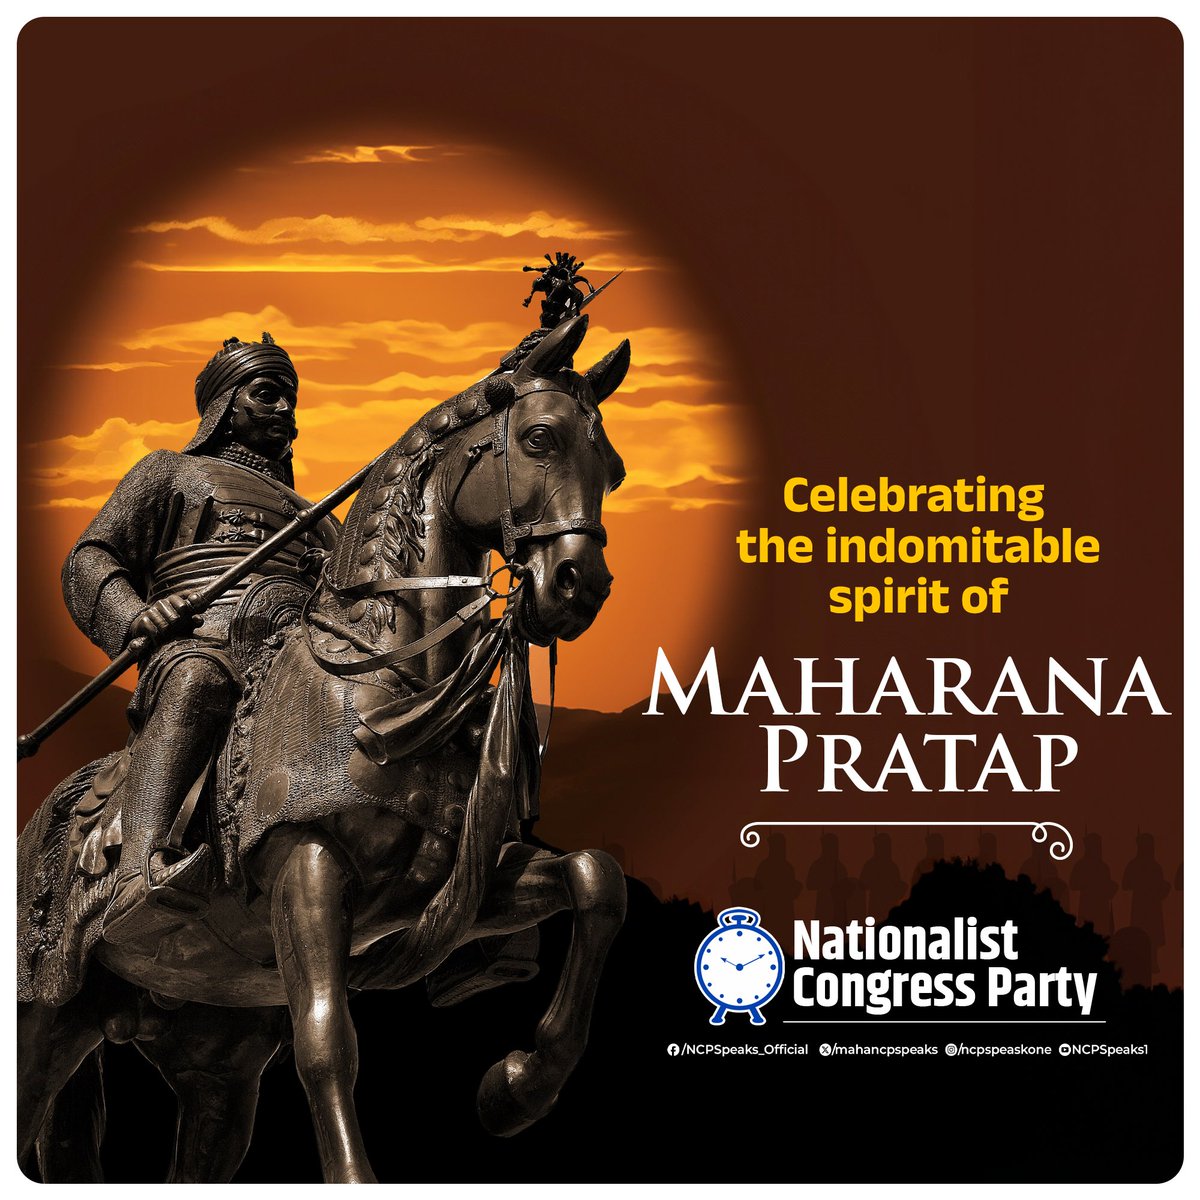 Let us join together to honor the valor and resilience of Maharana Pratap, a legendary warrior whose bravery continues to inspire us. Let us commemorate his birth anniversary by embracing the spirit of courage and determination.